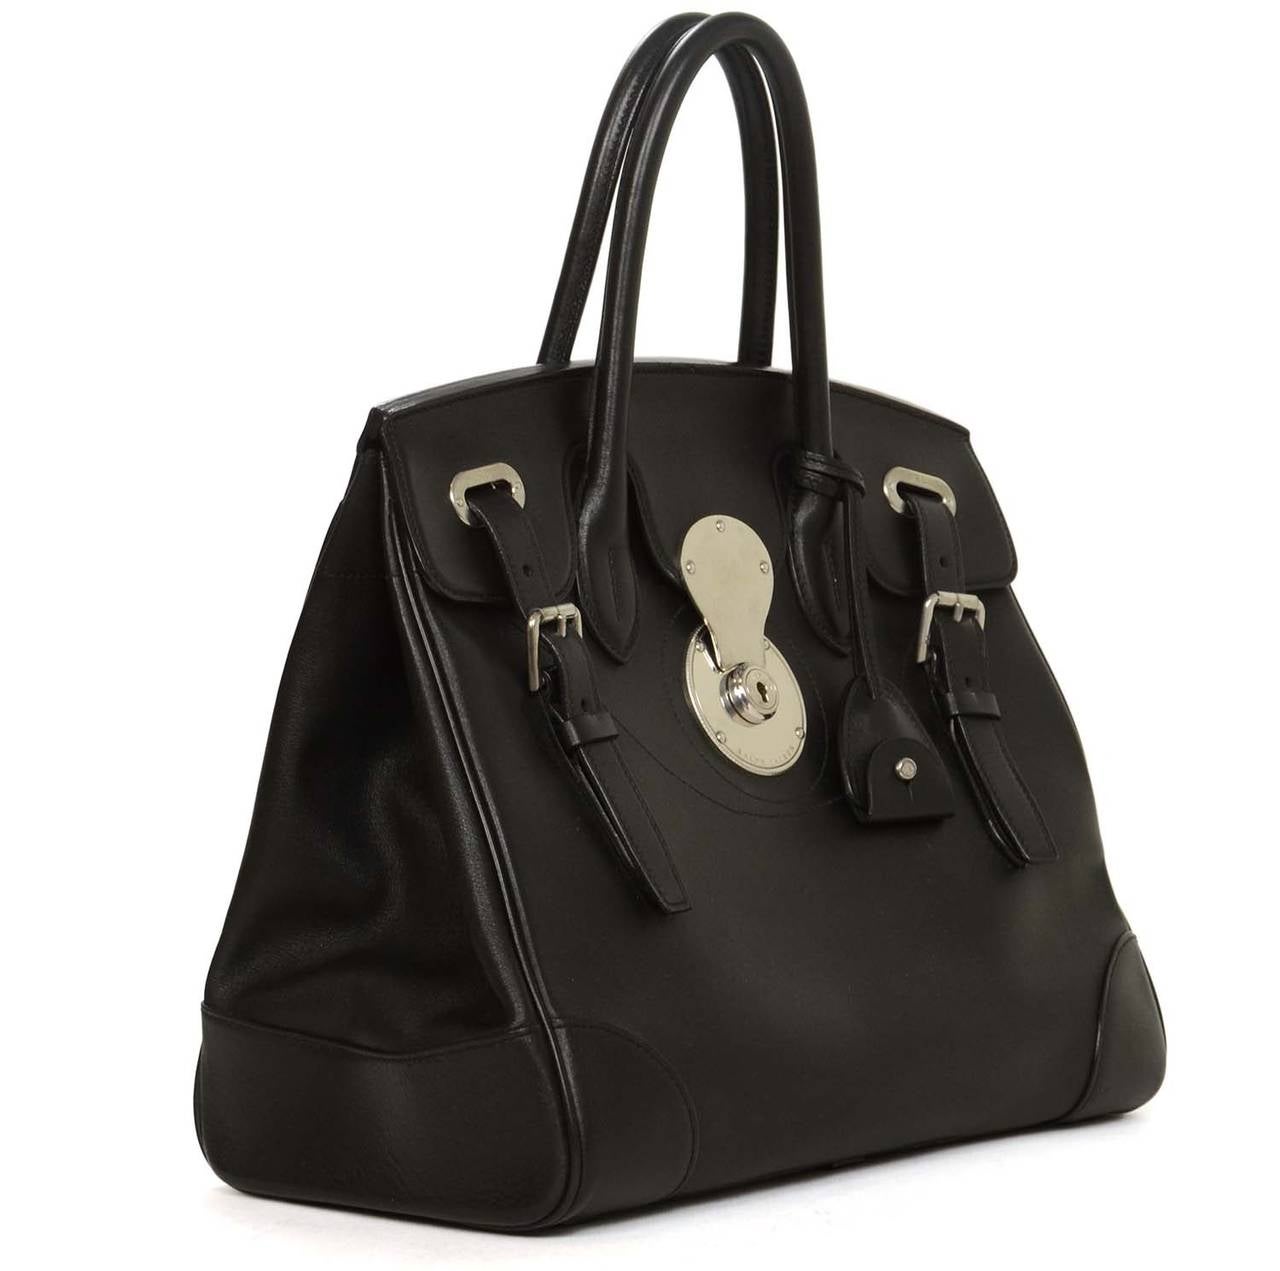 Ralph Lauren Black Ricky Bag
Made in: Italy
Color: Black
Hardware: Silvertone 
Materials: Leather, metal
Lining: Red leather
Closure/opening: Flap with posh lock and adjustable straps
Exterior Pockets: None
Interior Pockets: One zipper and